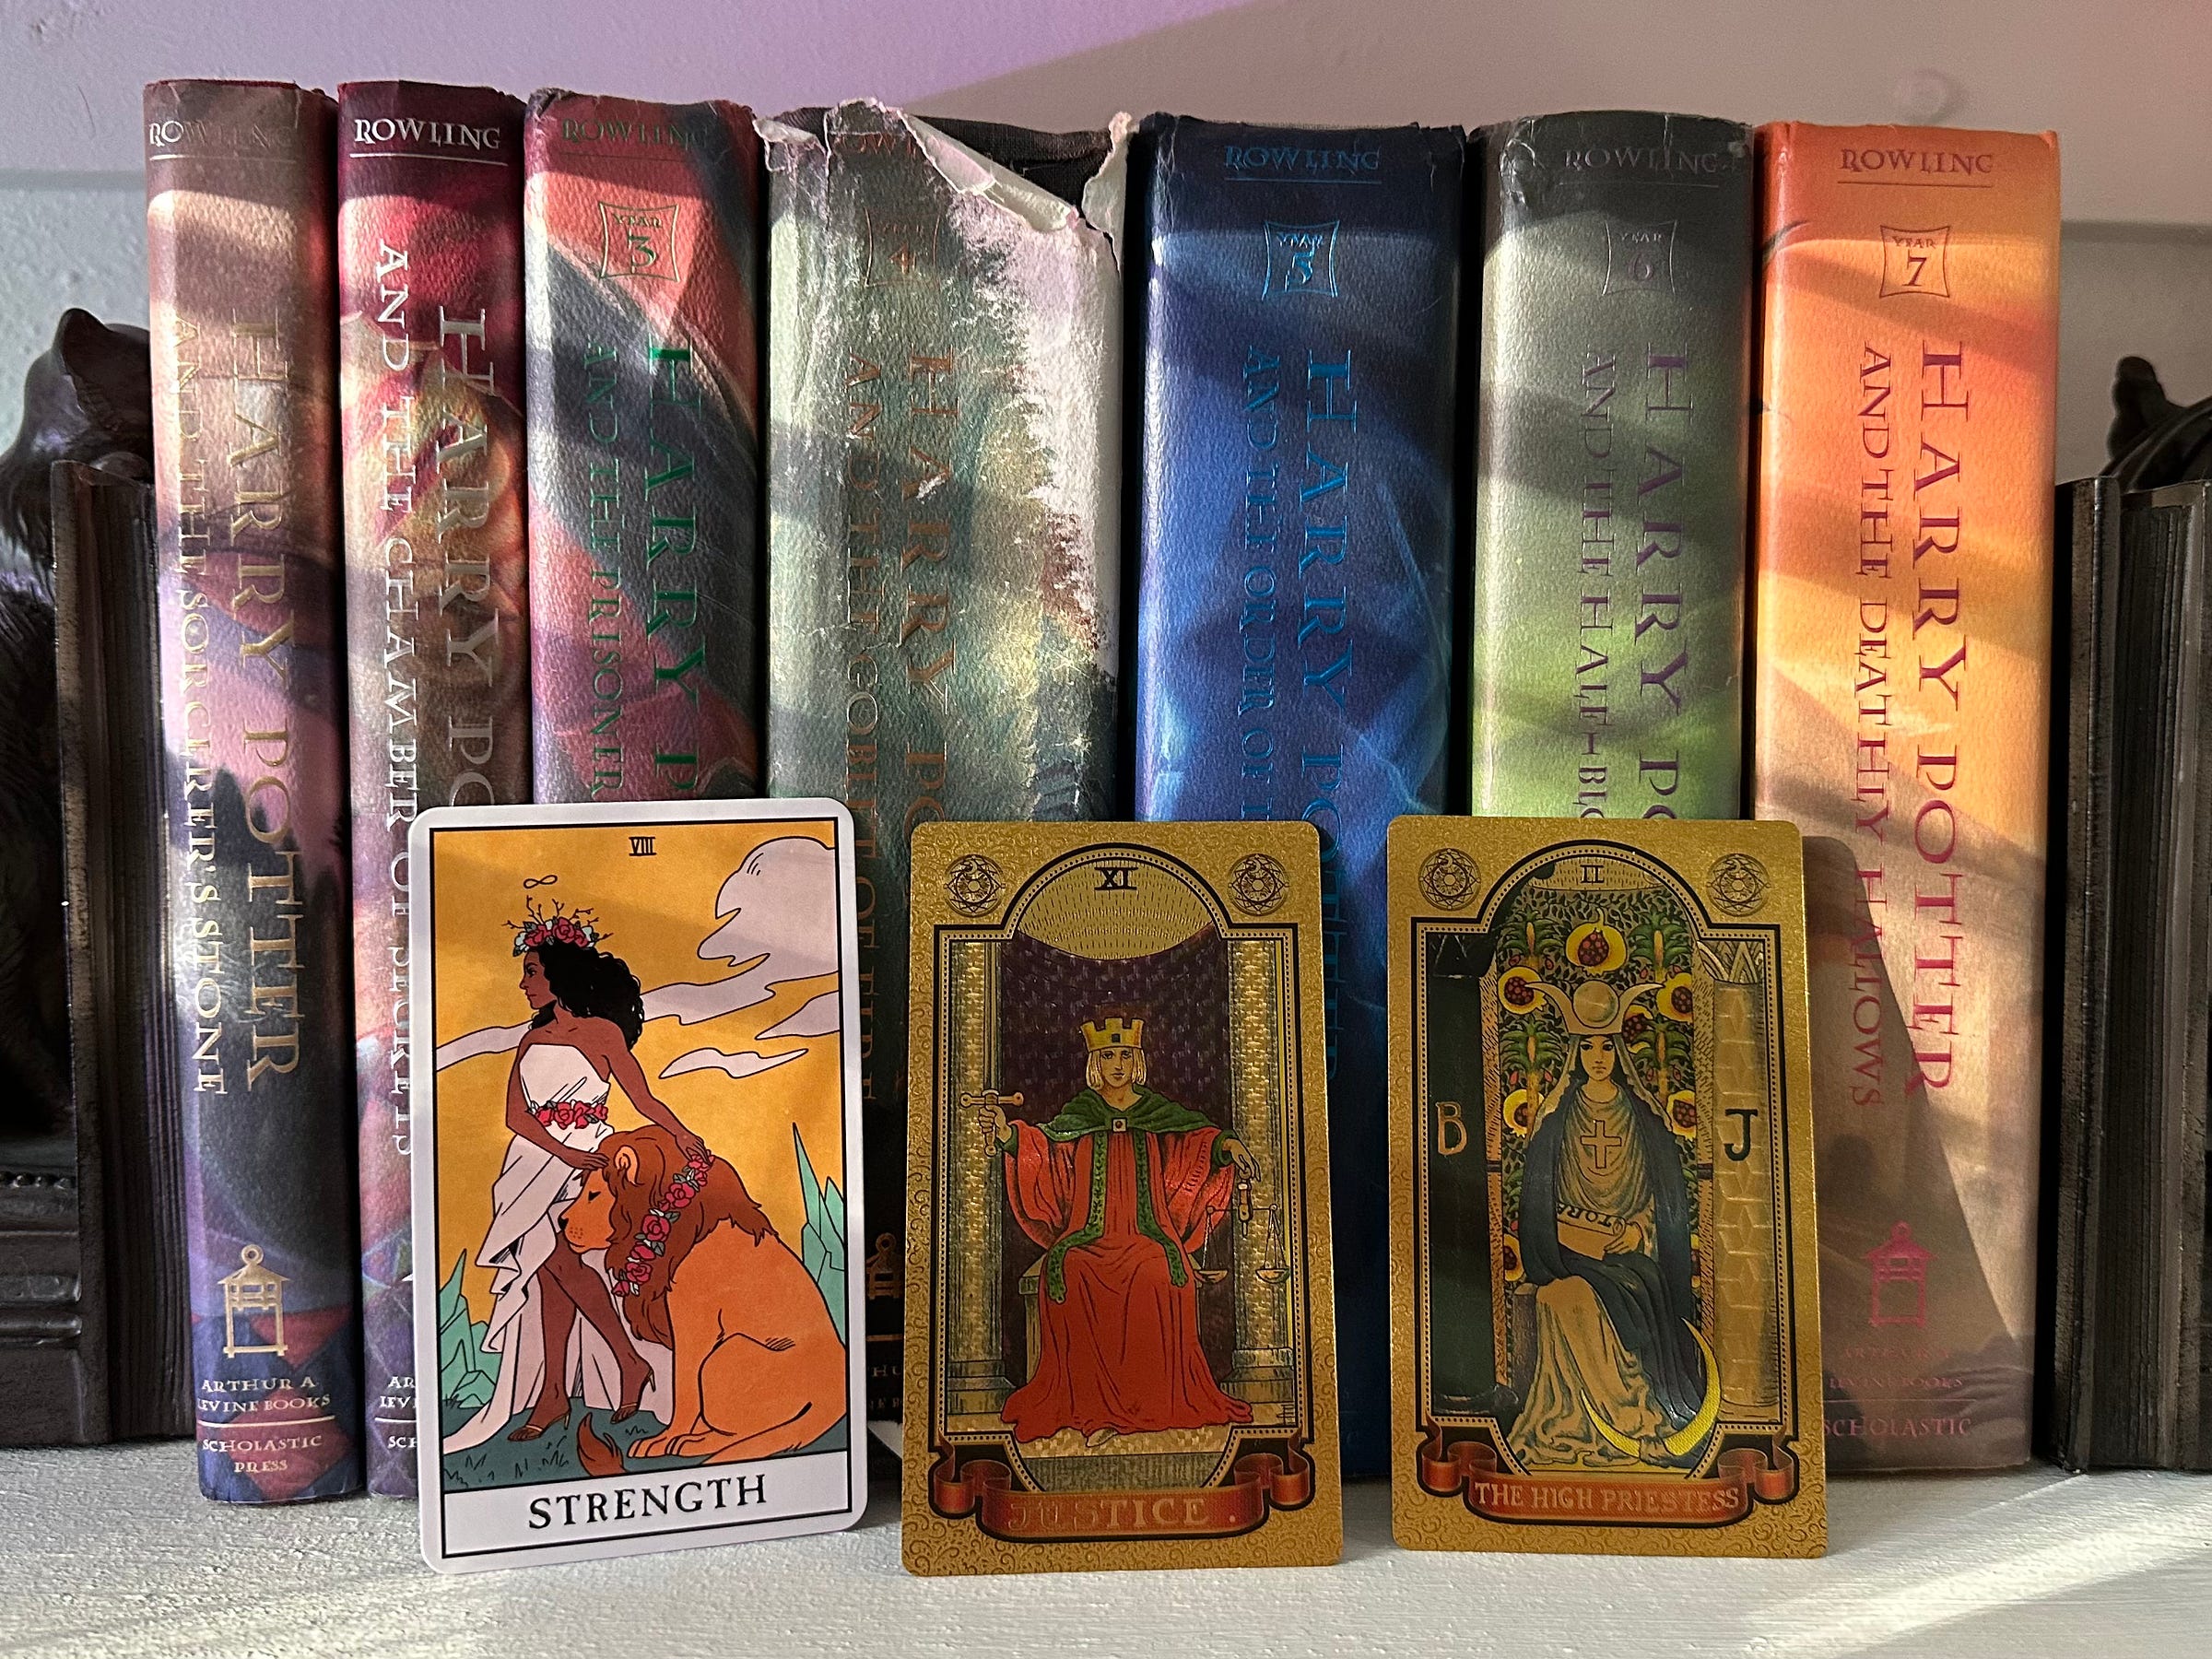 The Strength, Justice, and High Priestess Tarot cards rest against a collection of Harry Potter books on a bookshelf.